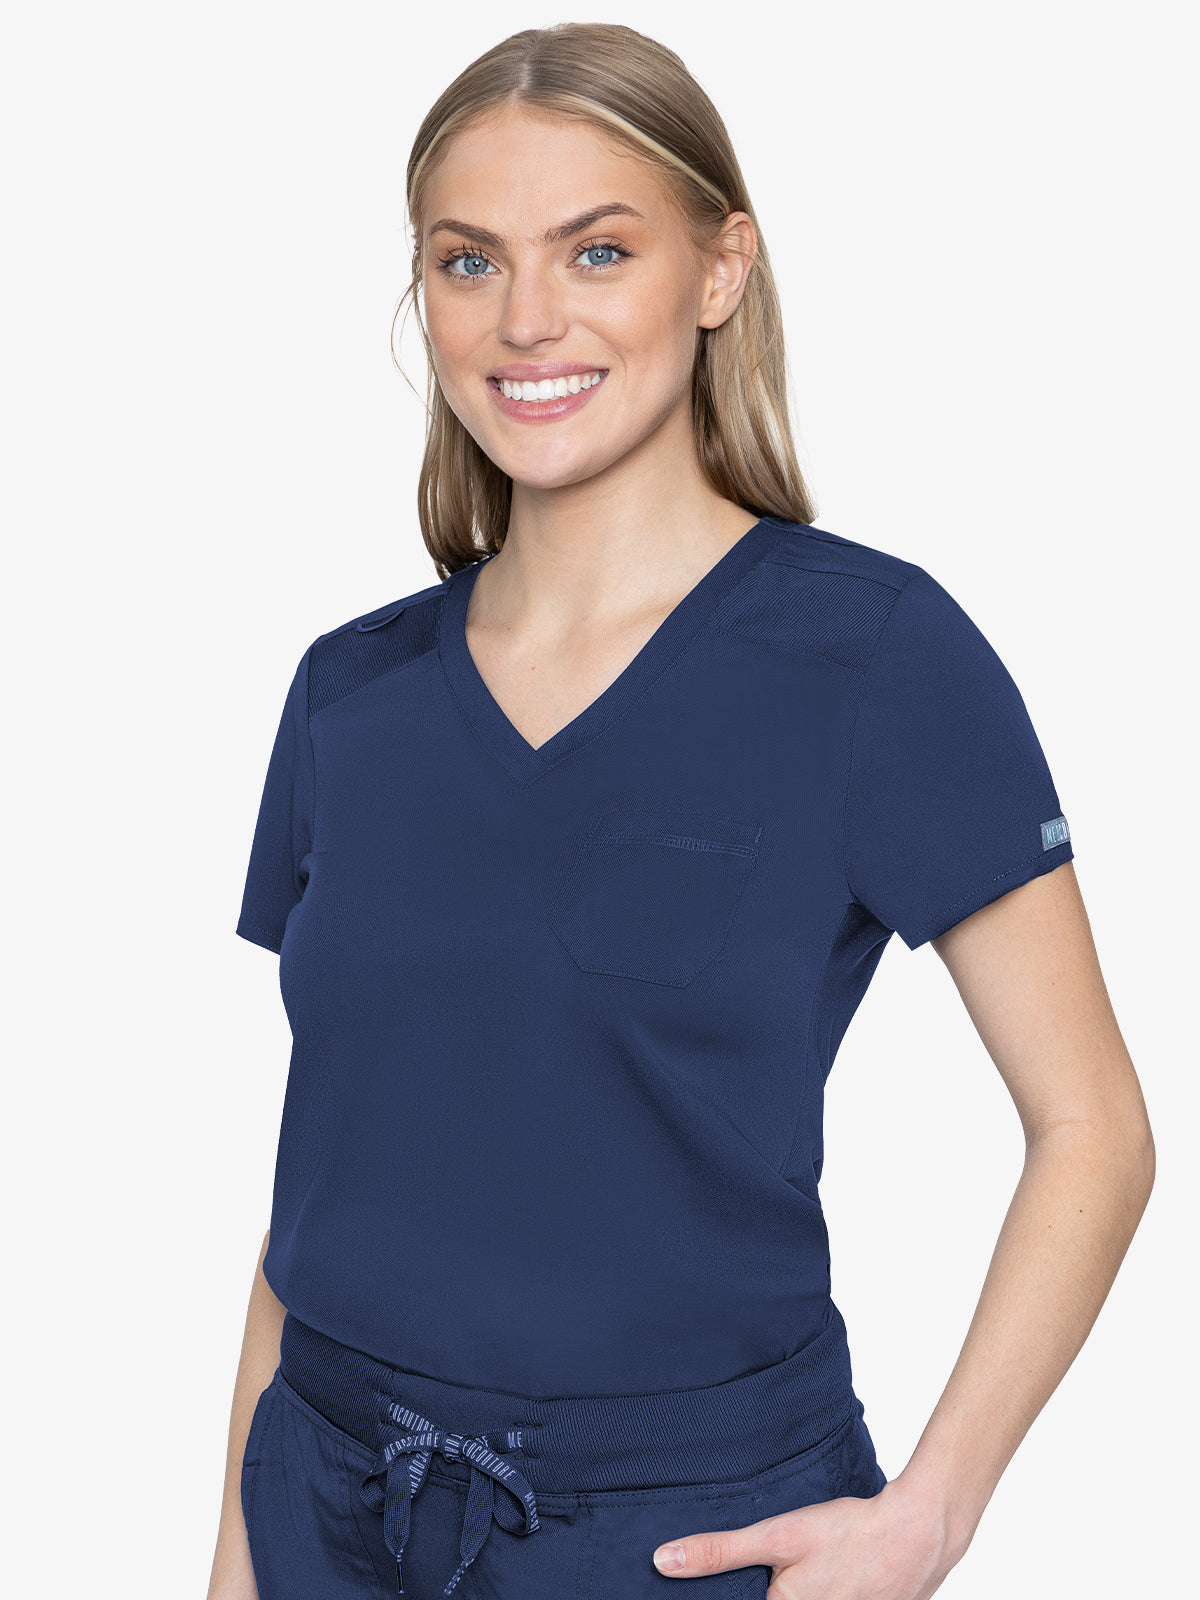 Med Couture Touch 7448 Women's Tuckable Chest Pocket Top Navy Front